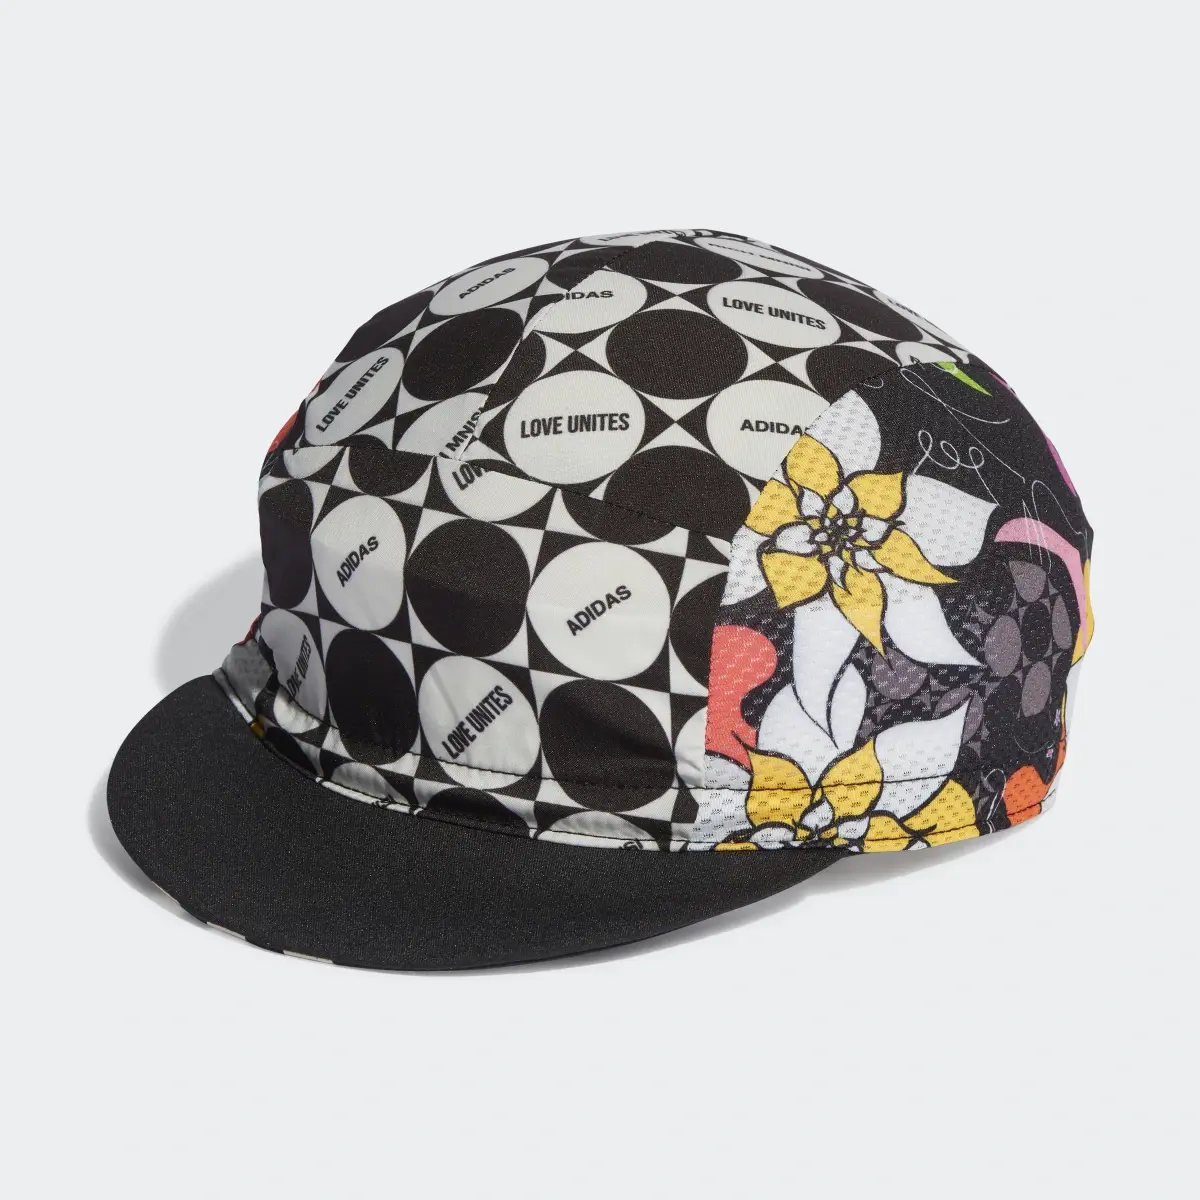 Adidas Casquette Rich Mnisi x The Cycling. 2